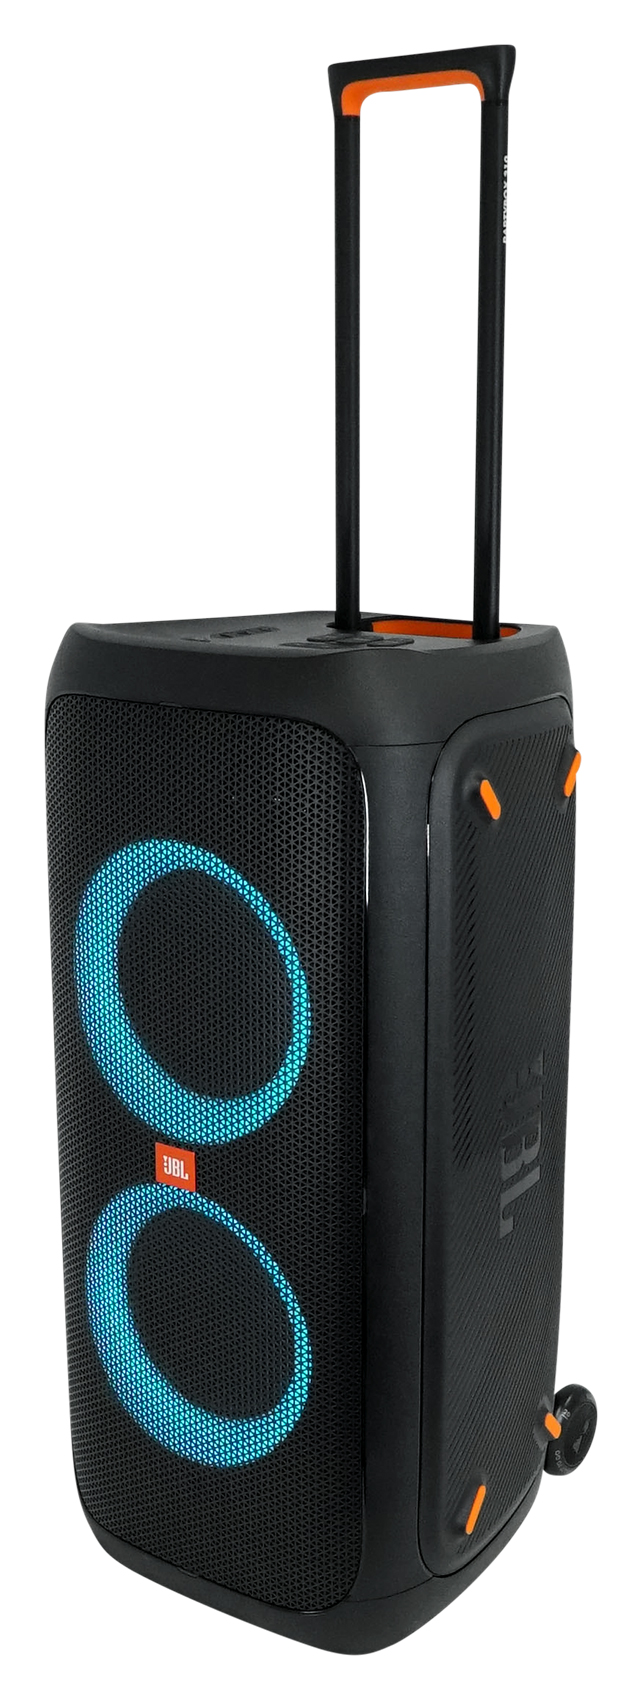 JBL PartyBox 310 Portable Stereo Bluetooth Speaker with Built-in Microphone,  Guitar input and Dynamic Lights